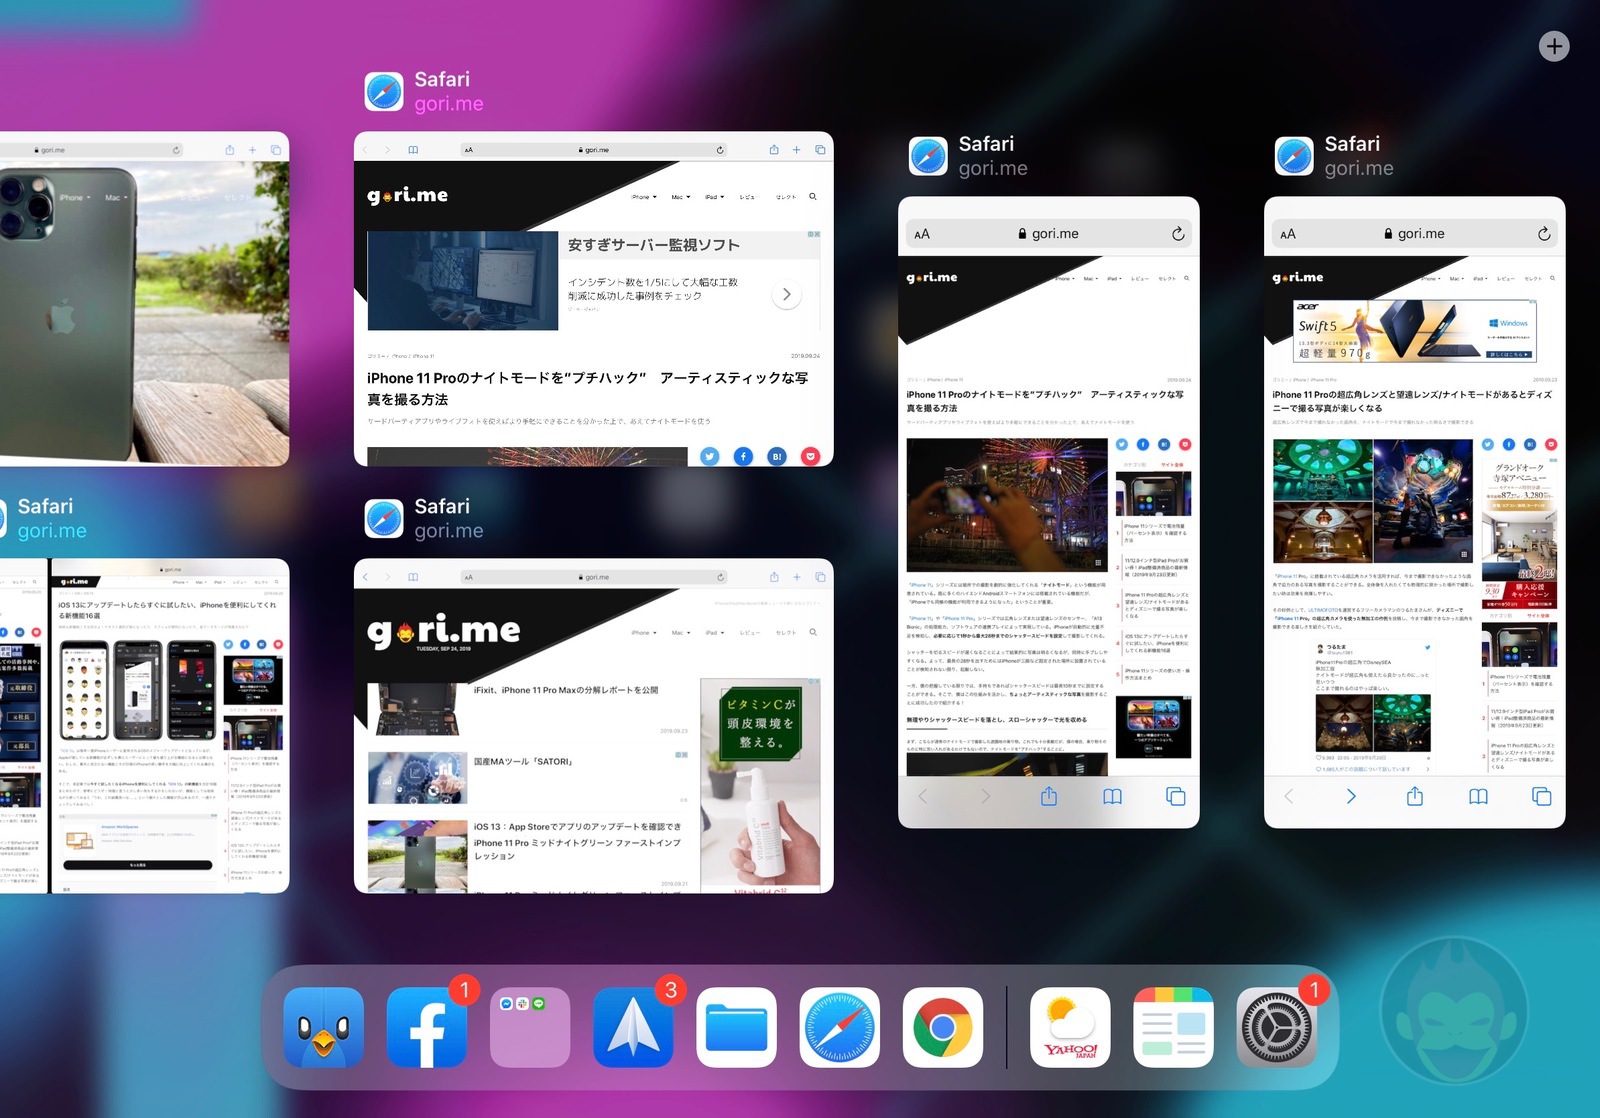 iPadOS13-features-you-should-try-05.jpg